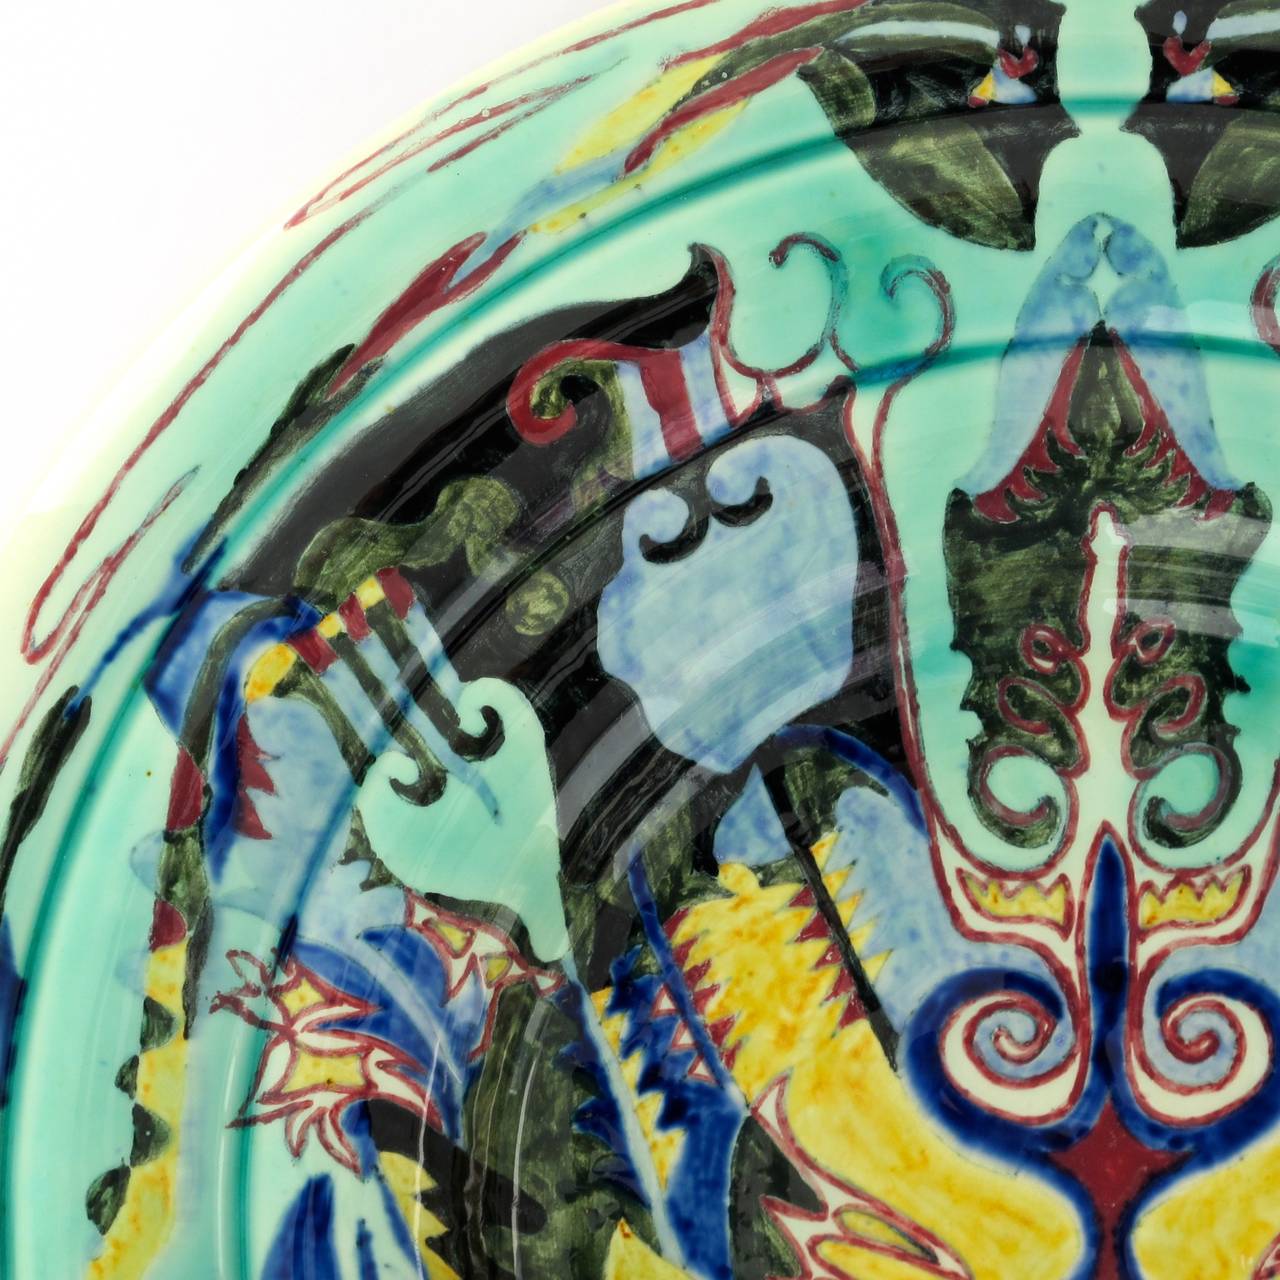 Stunning Art Nouveau wall plate by Theo Colenbrander for The Hague Plateelbakkerij Rozenburg. The symmetrically arranged but colorful and whimsical decor anticipates the Art Nouveau but remarkably also shows - although being designed over 25 years